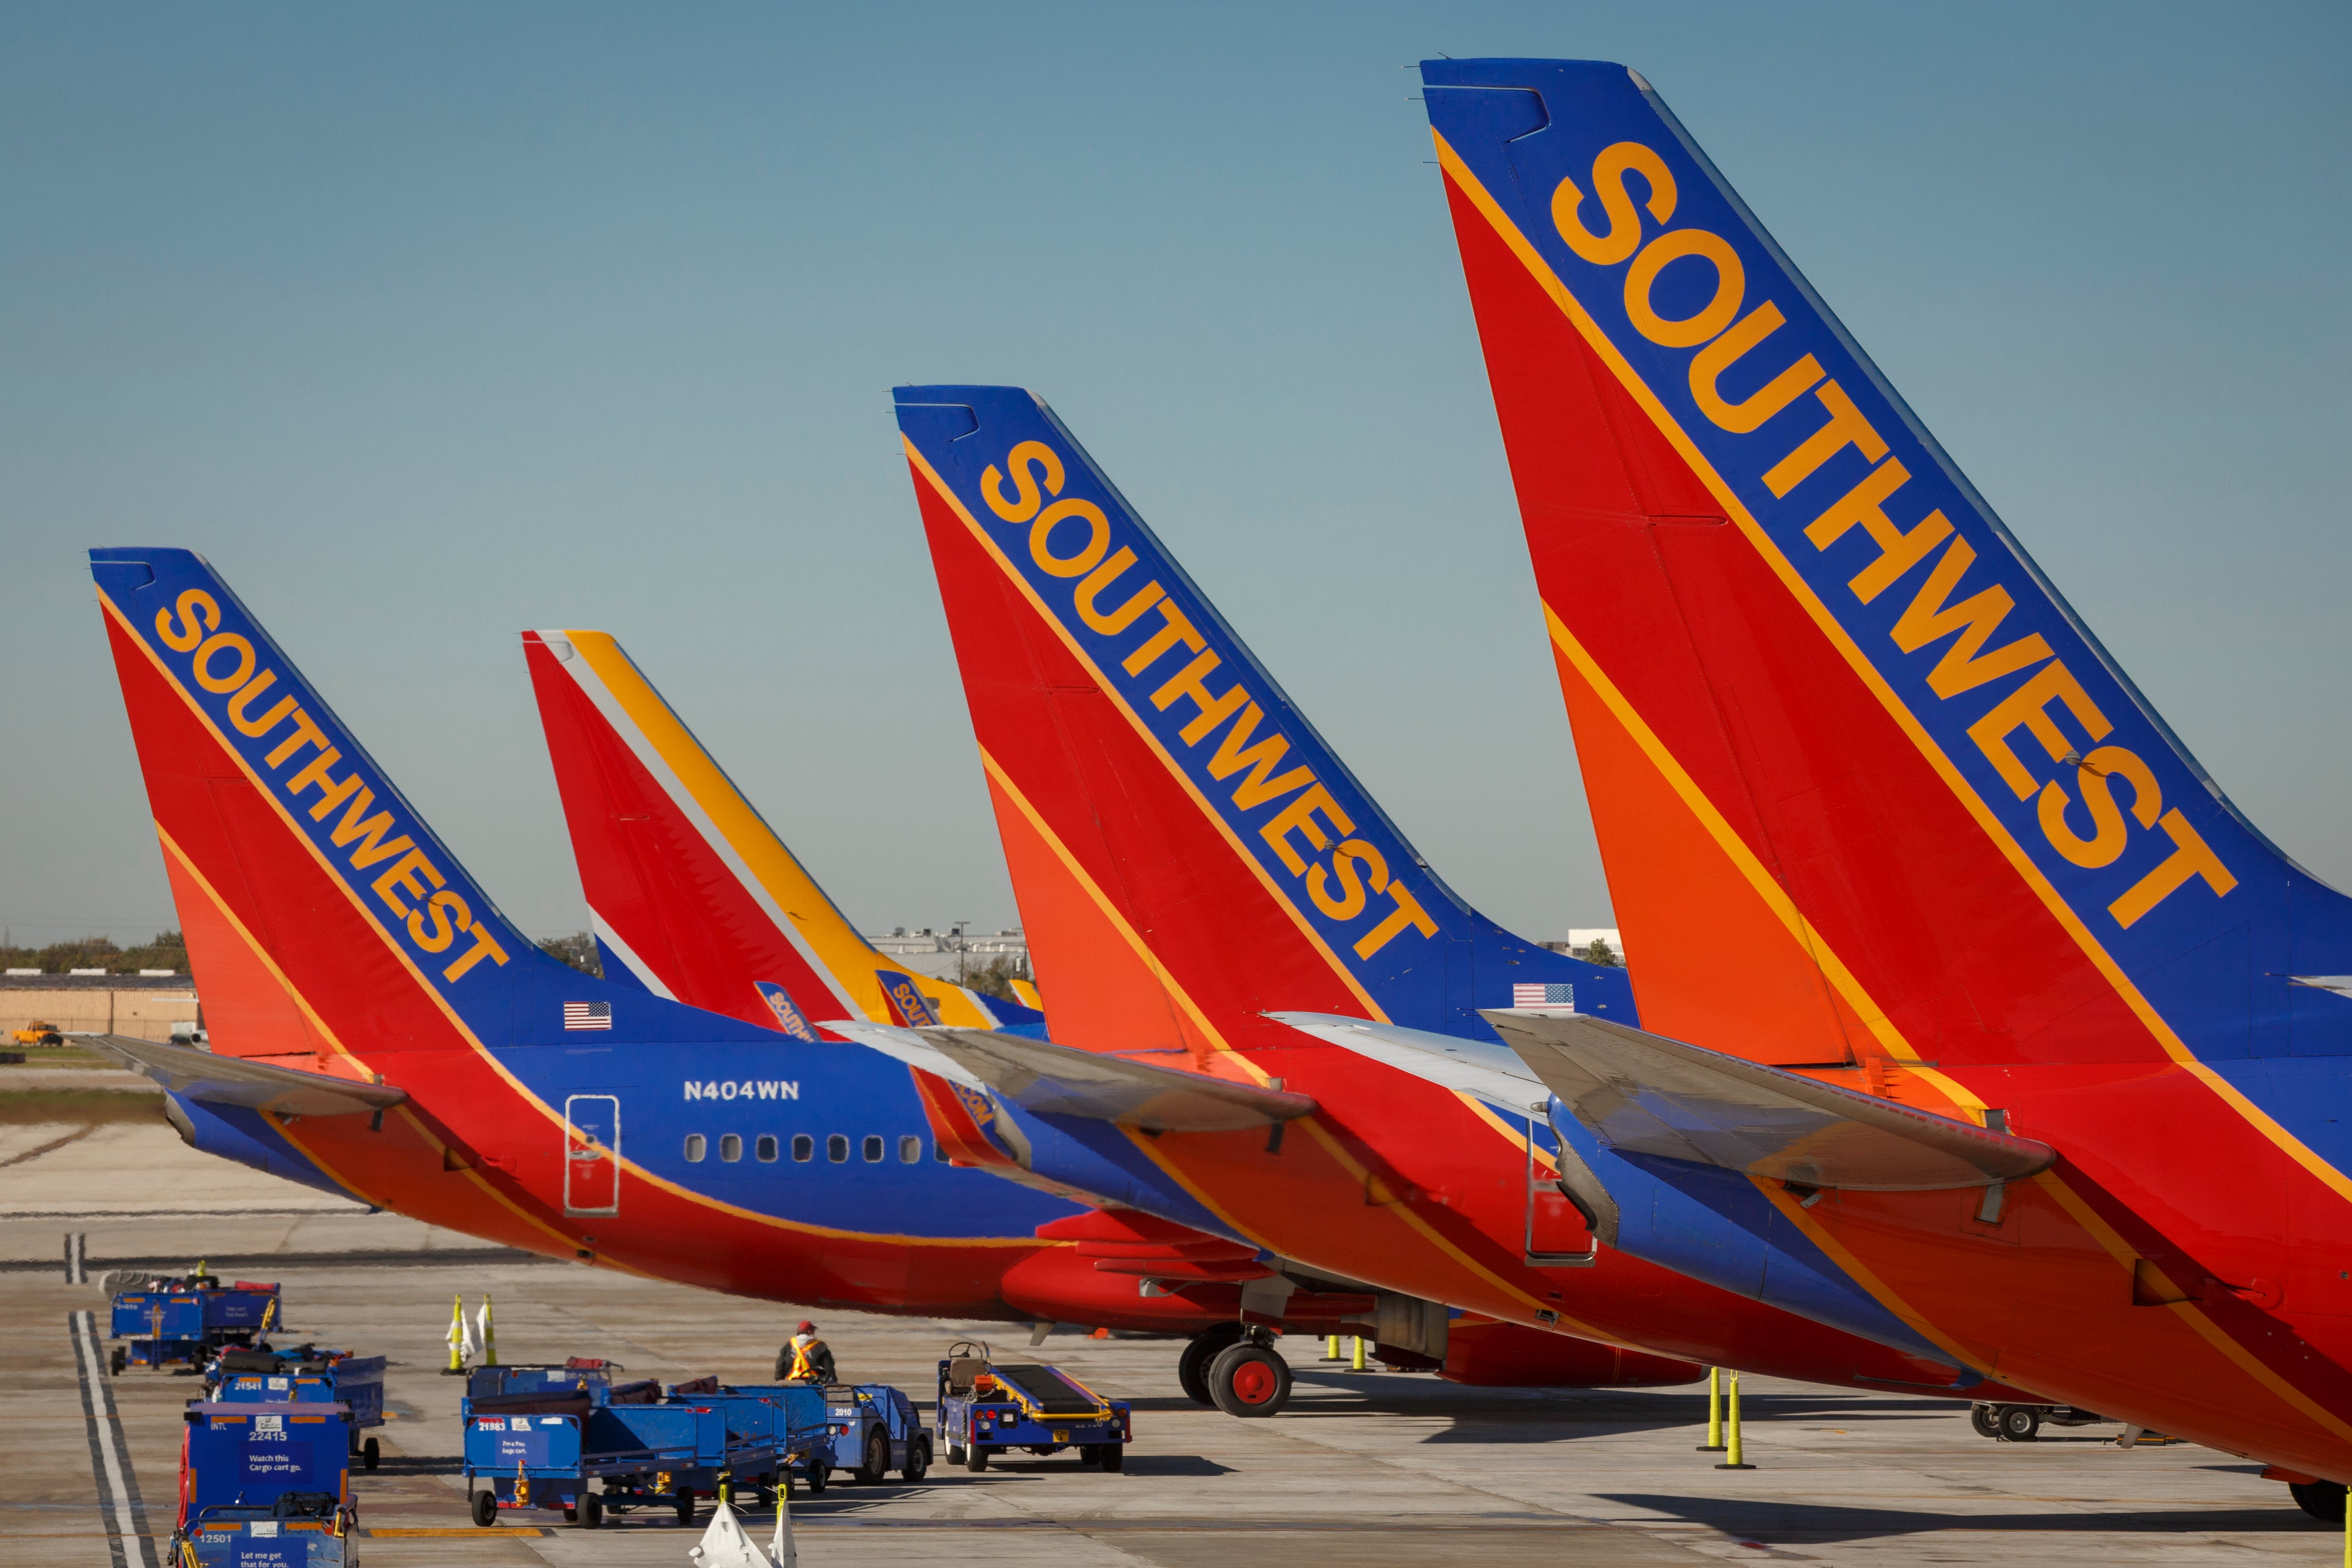 Southwest Airlines at Hobby AIrport in Houston